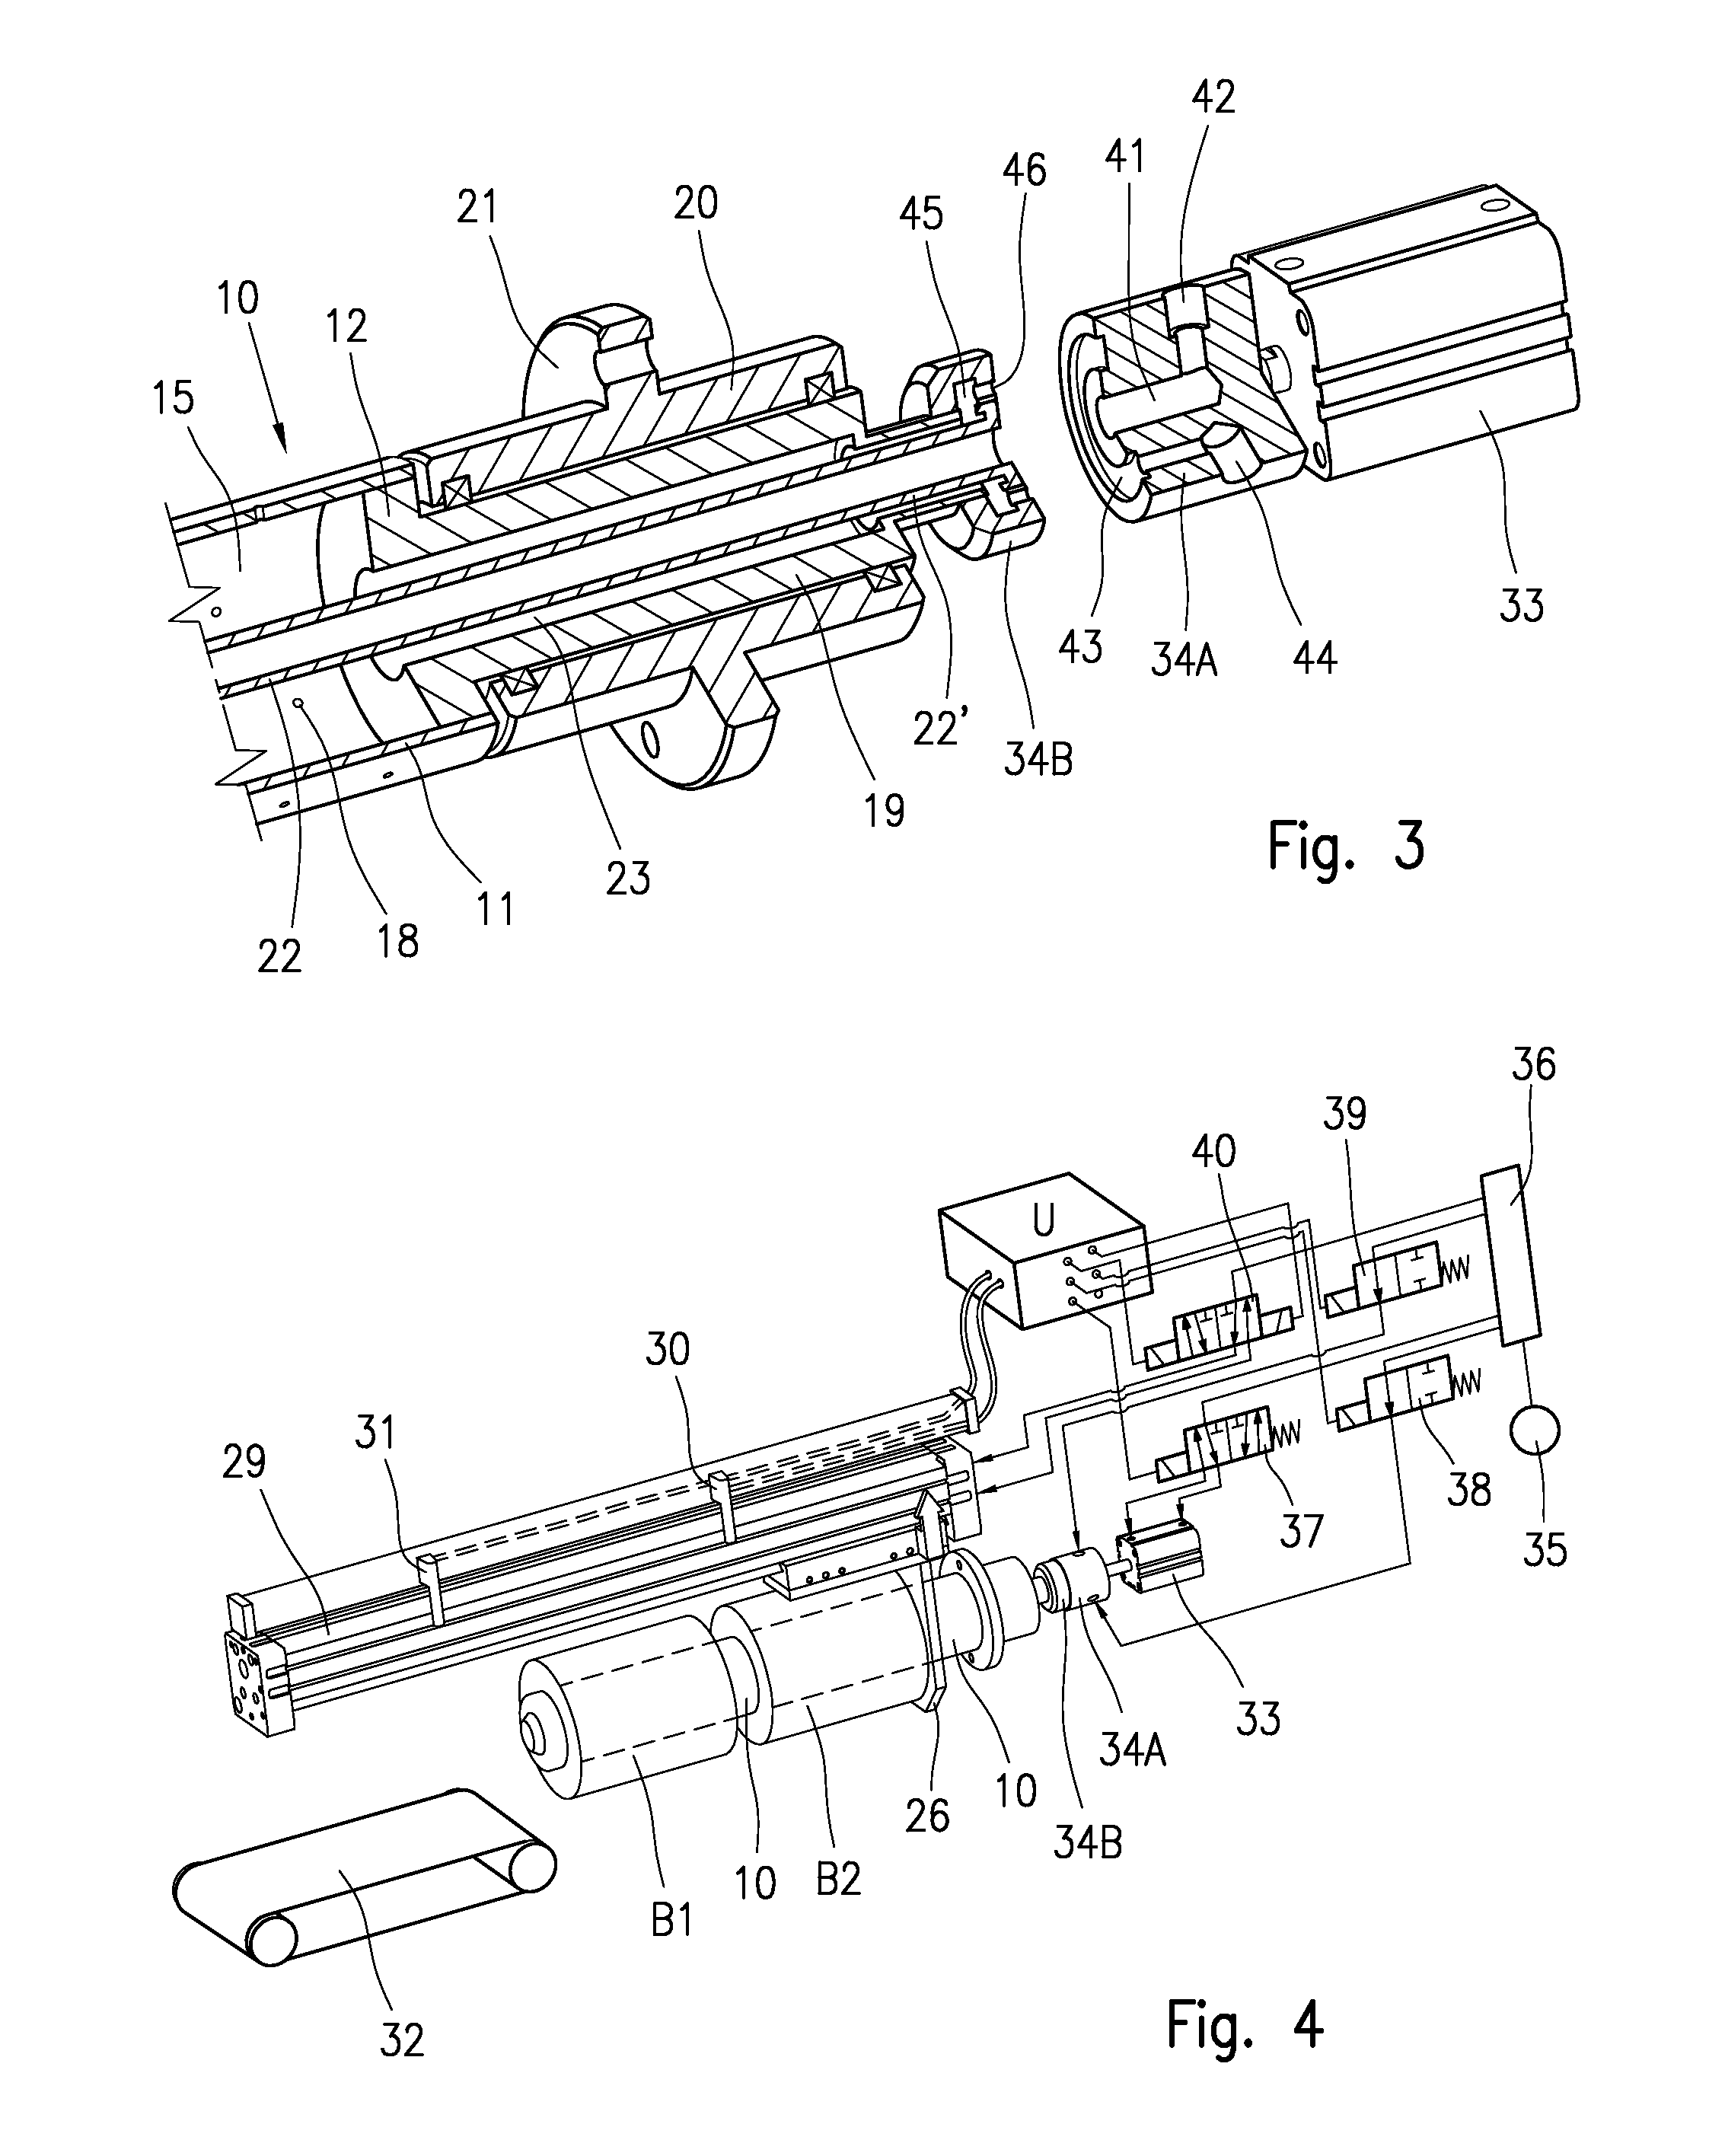 Method, mandrel and apparatus for winding up and removing coreless rolls of stretch film